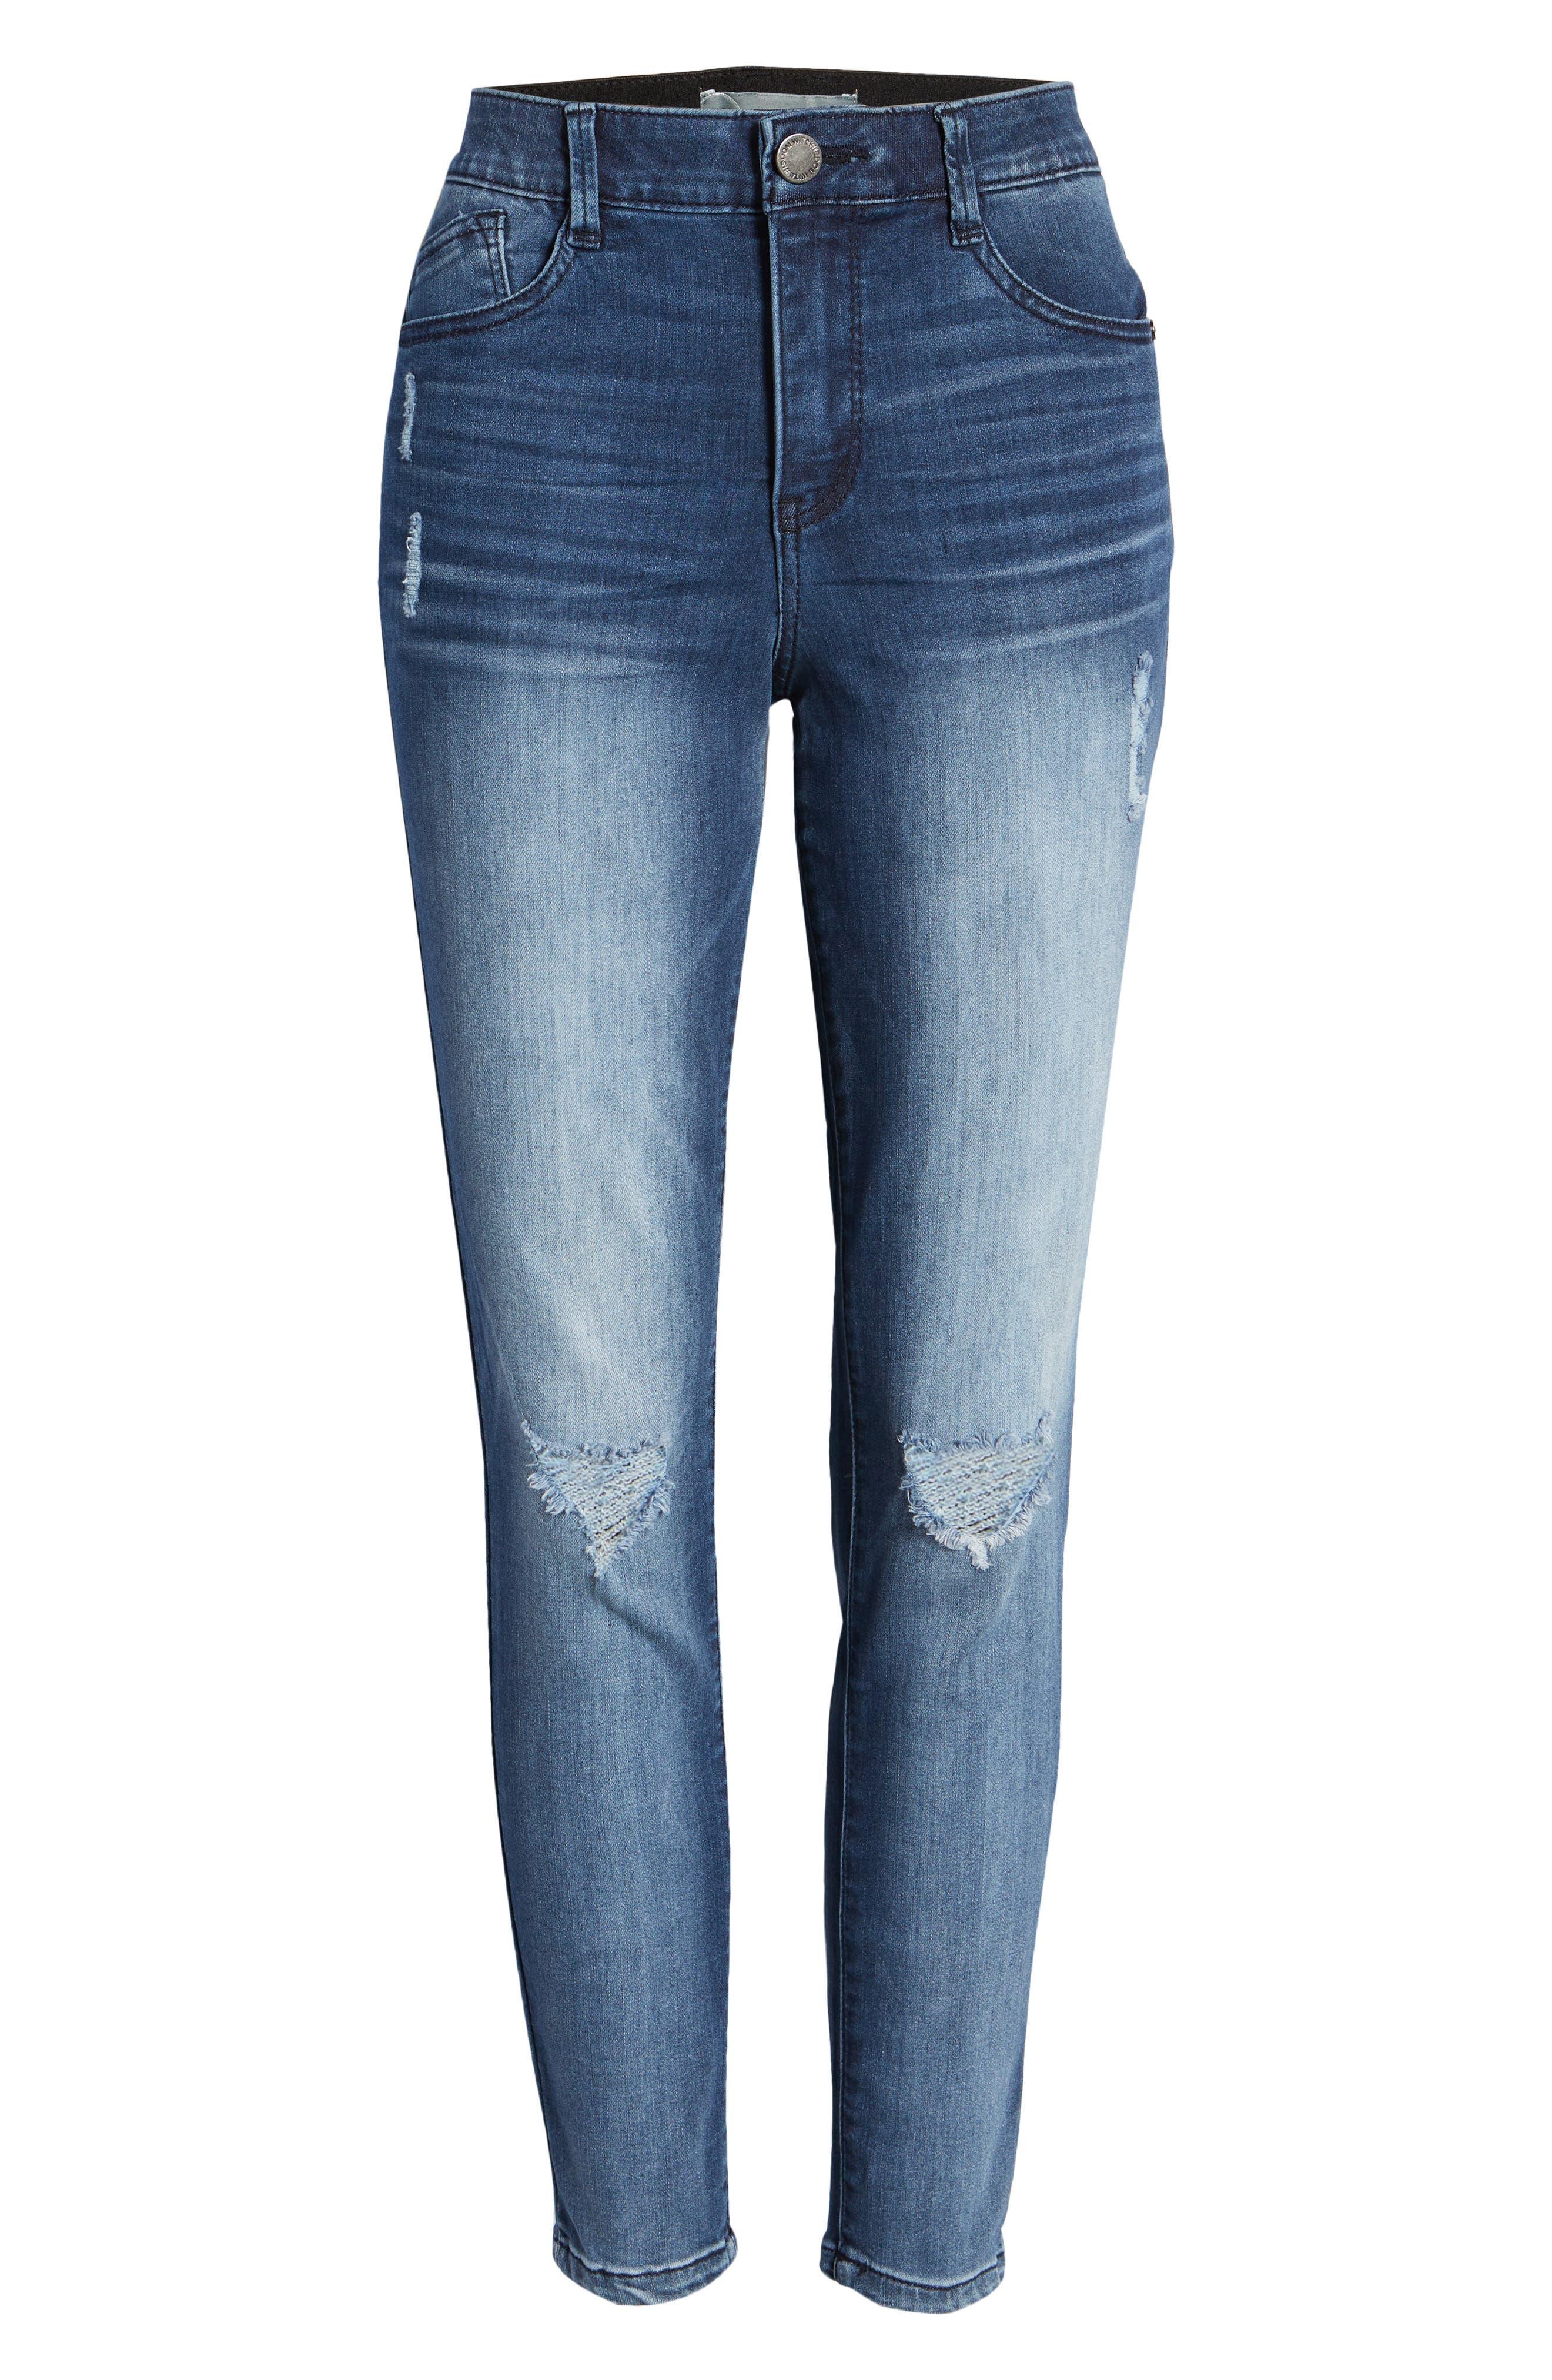 Wit & Wisdom Ripped High Waist Ankle Skinny Jeans in Blue | Lyst